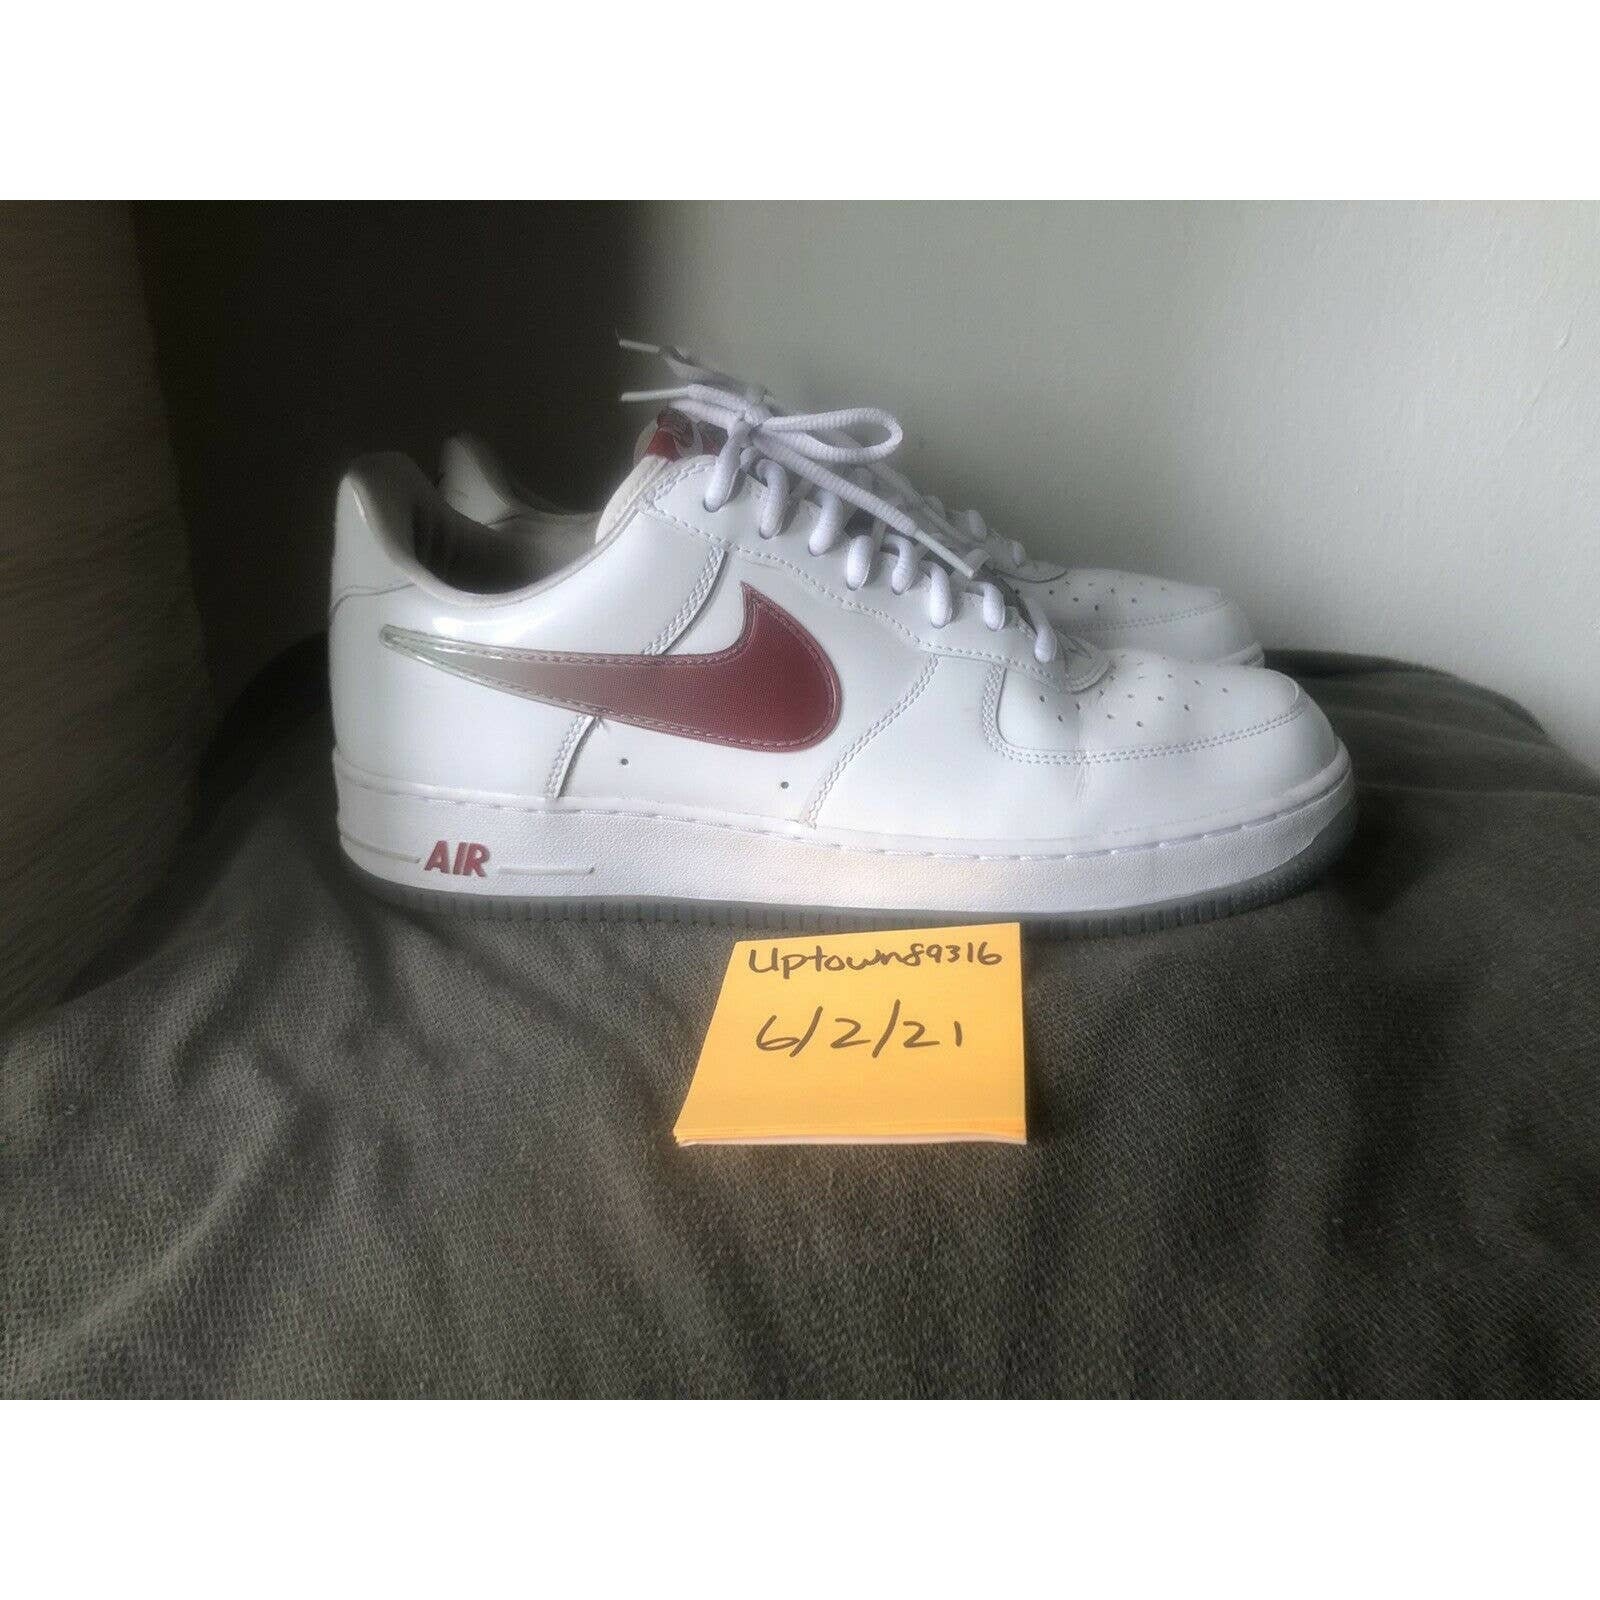 Nike Air Force one AF 1 82 Men Authenic Size sz 11 Leather White